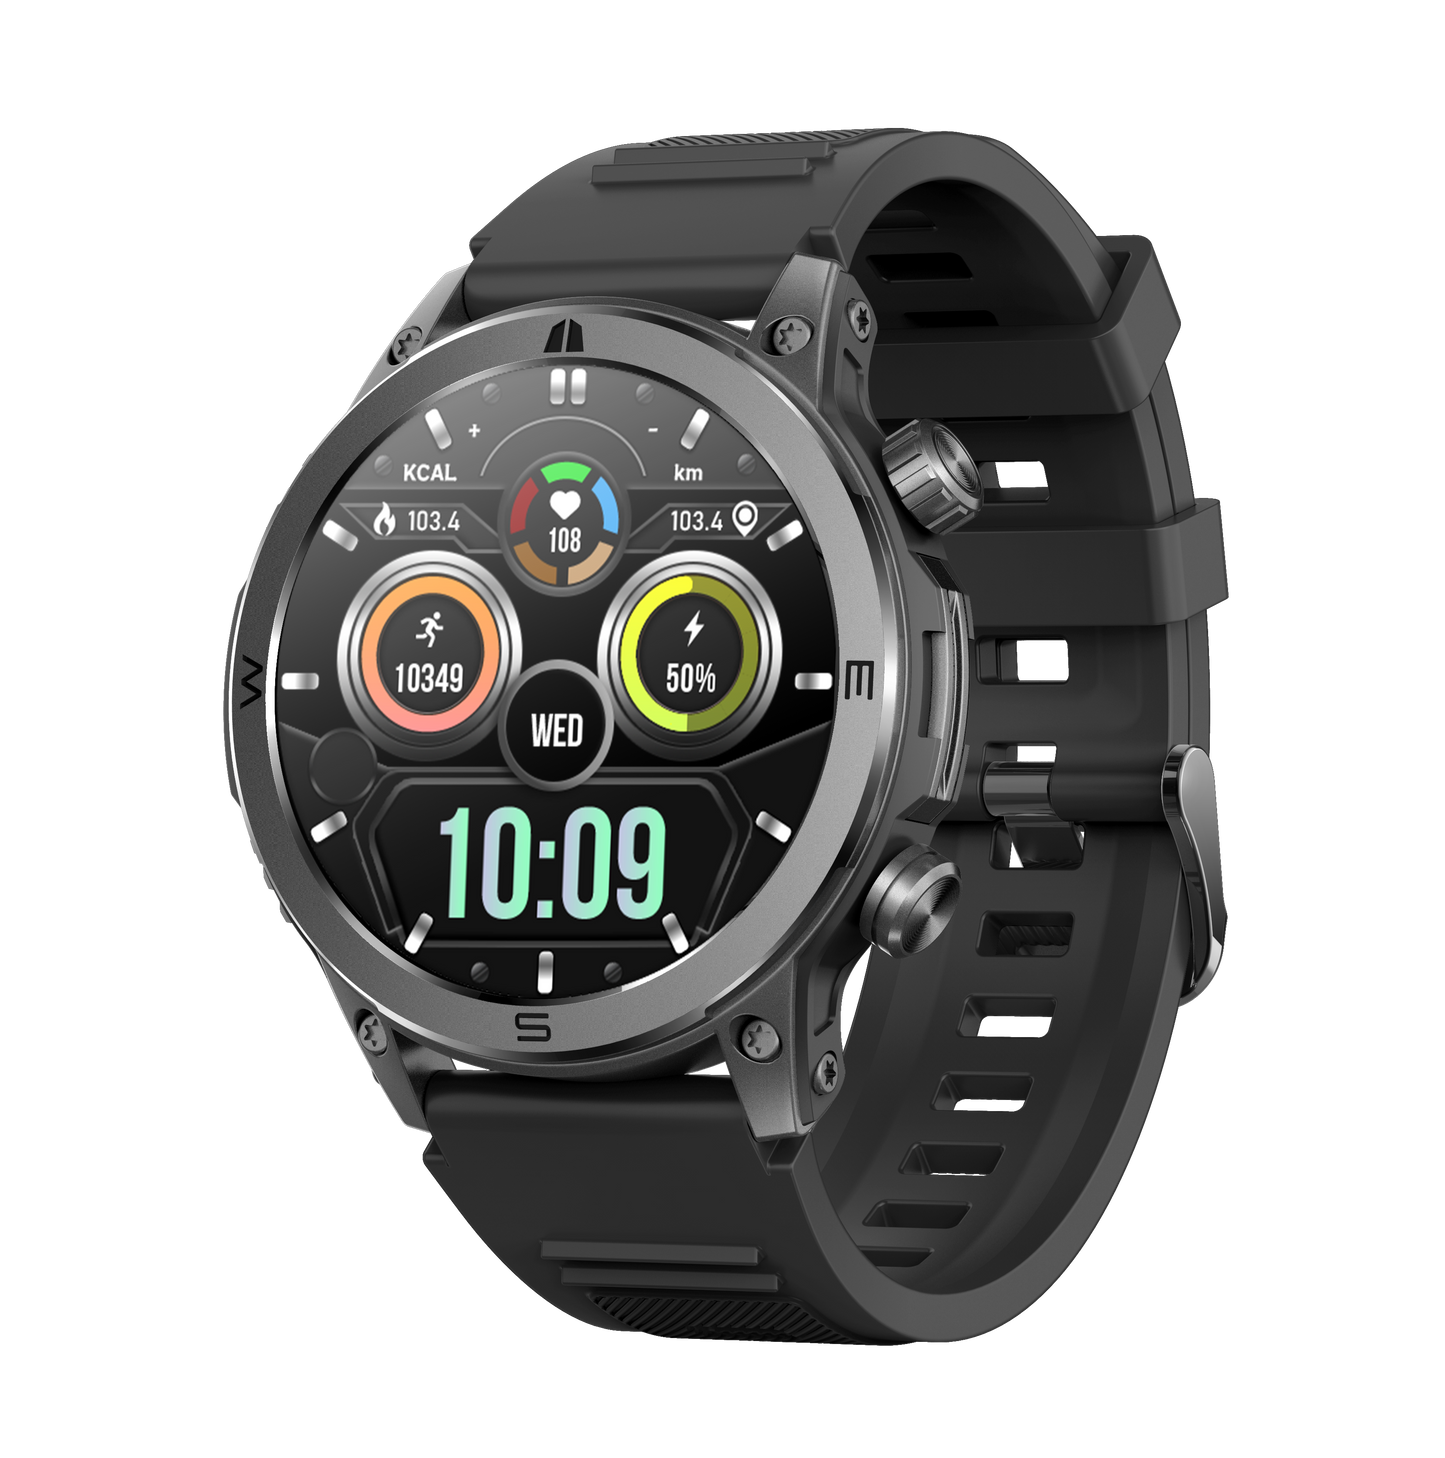 New Morepro HM38 Strong Smartwatch with Bluetooth Calling Fitness Tracker